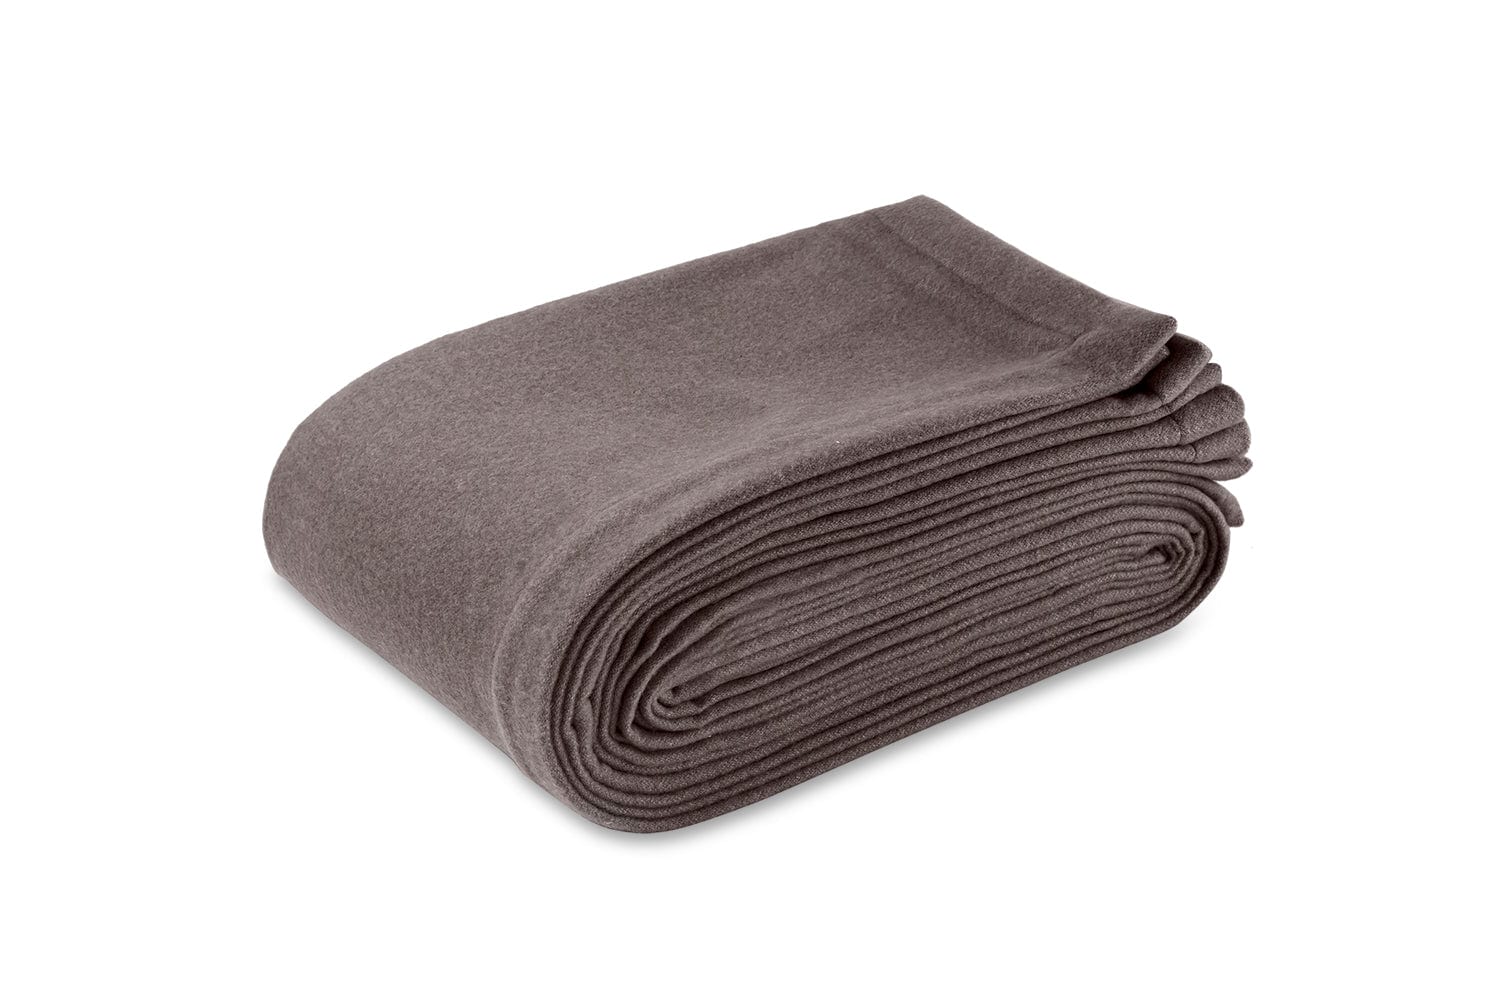 Blanket - Cosmo Sable Brown Merino Wool Blanket - Matouk at Fig Linens and Home